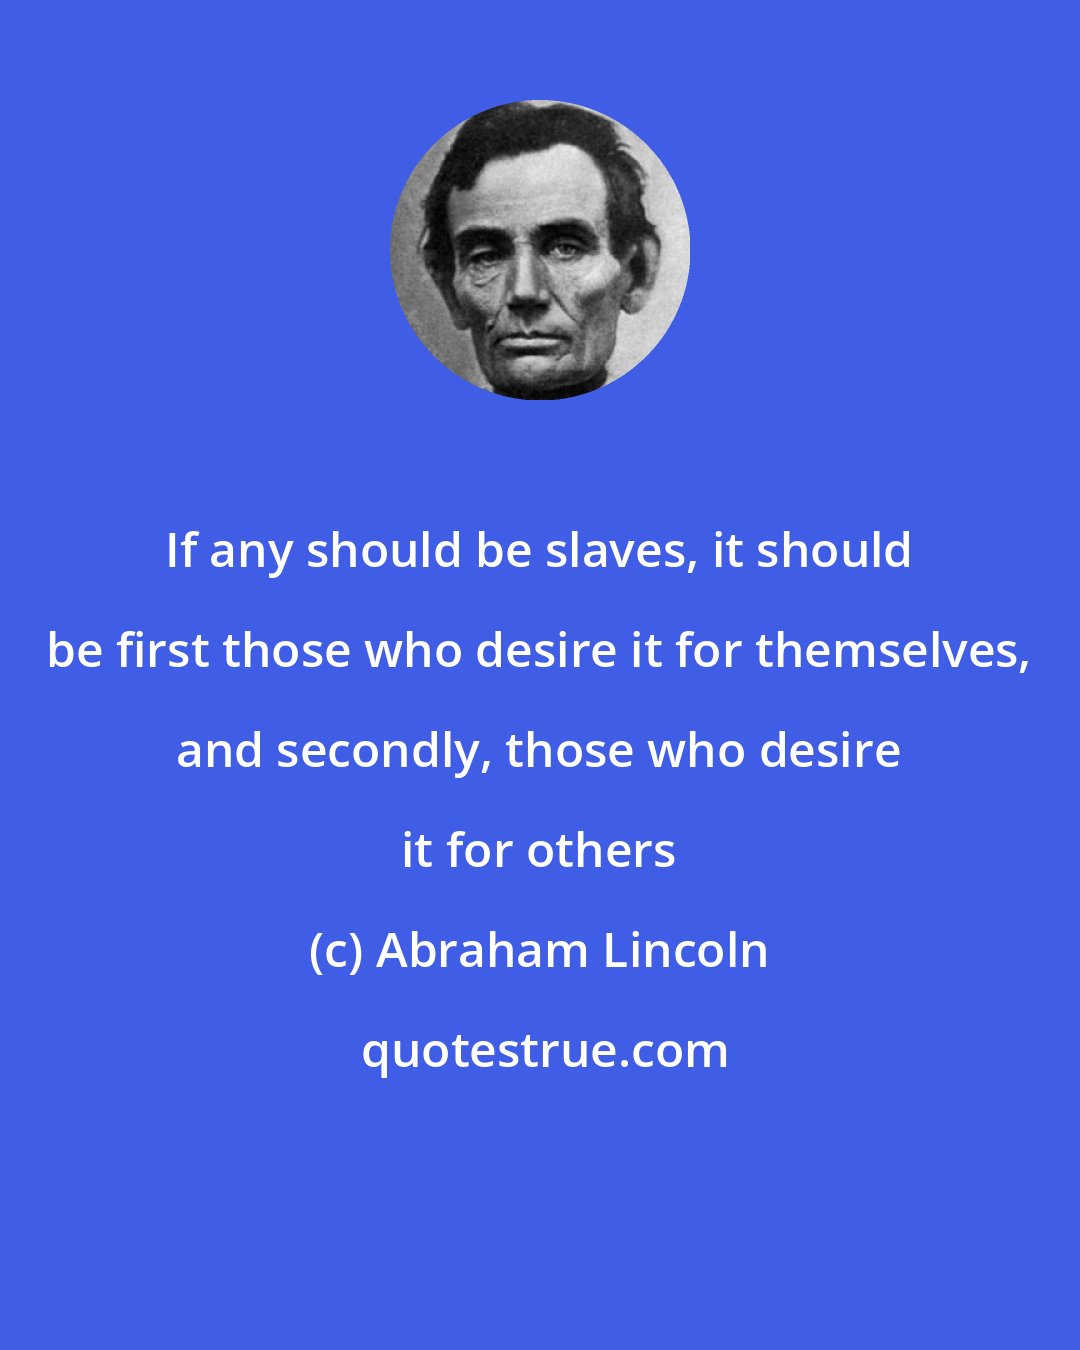 Abraham Lincoln: If any should be slaves, it should be first those who desire it for themselves, and secondly, those who desire it for others